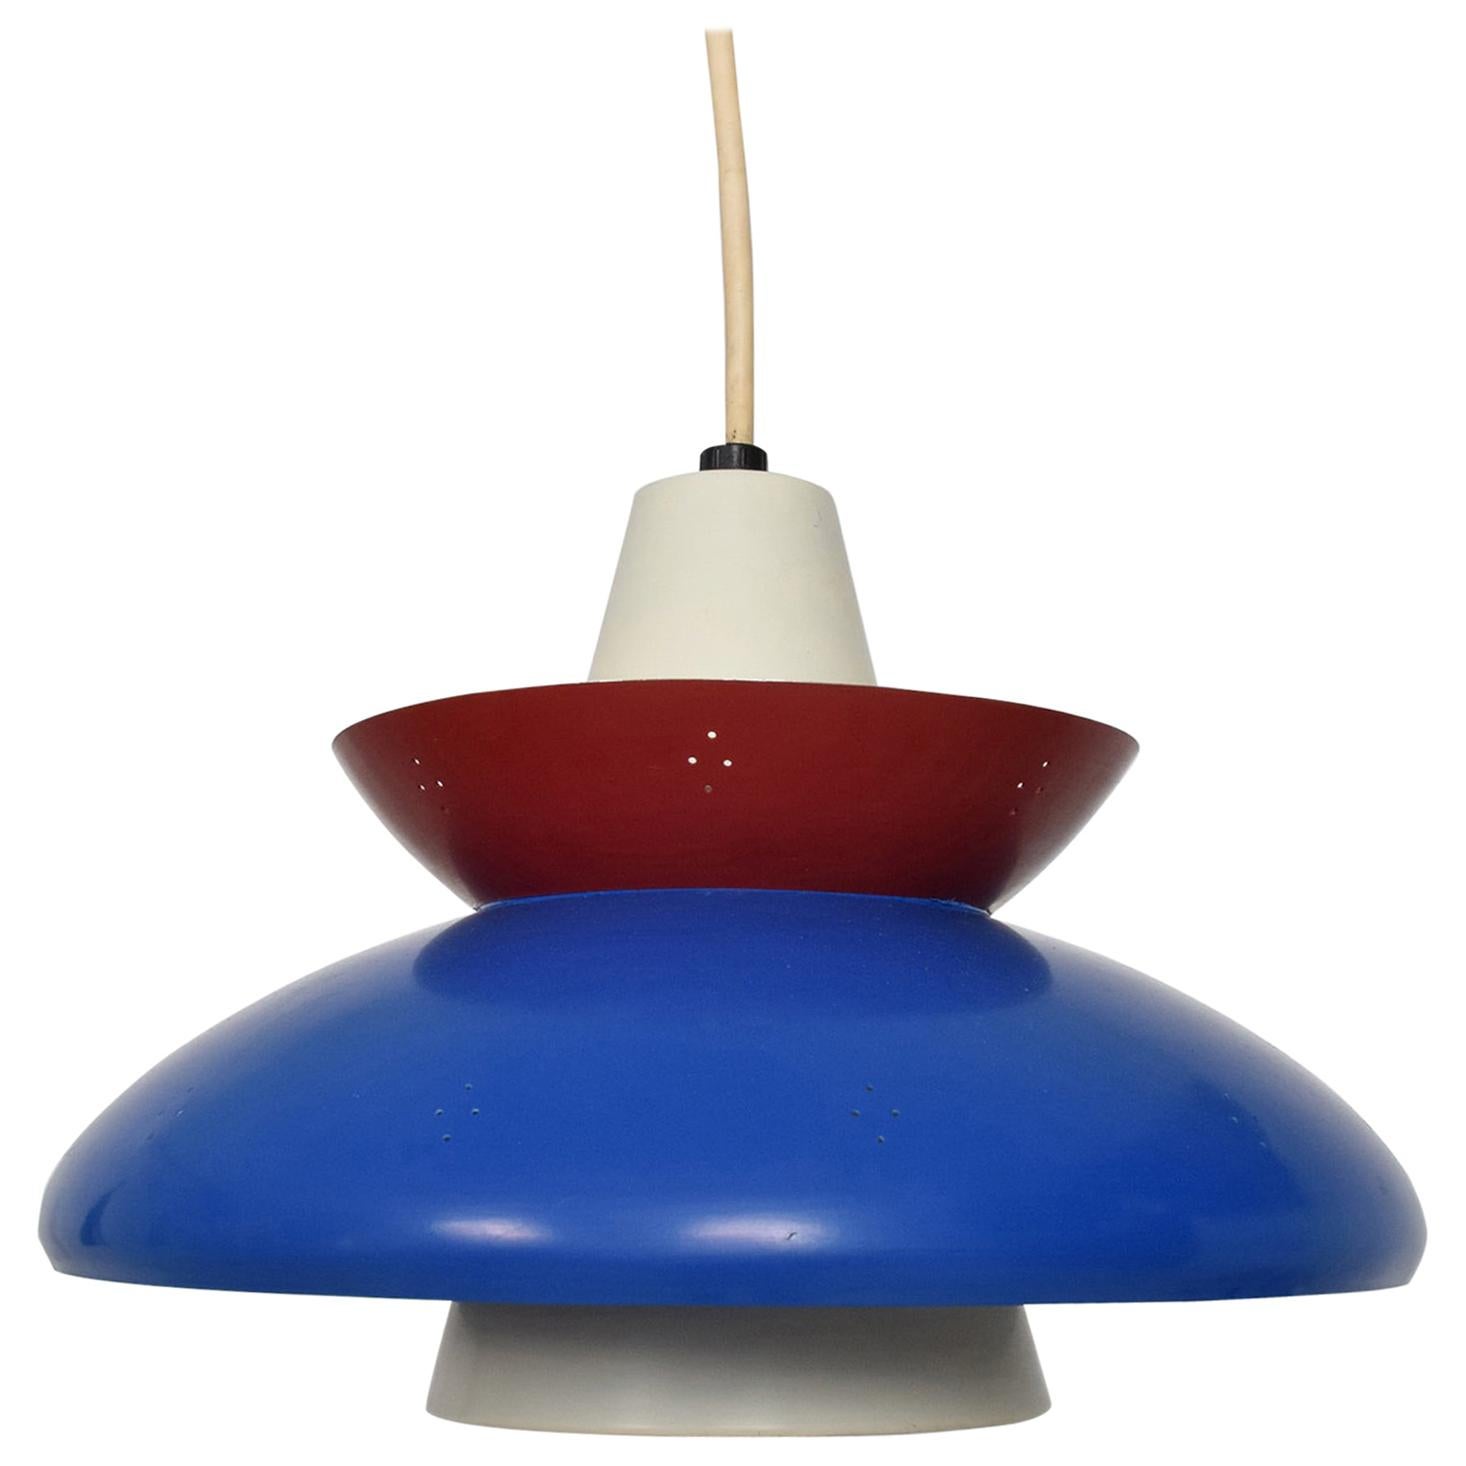 1950s USA Patriotic Pendant Light Mid-Century Modern Red White and Blue Lamp